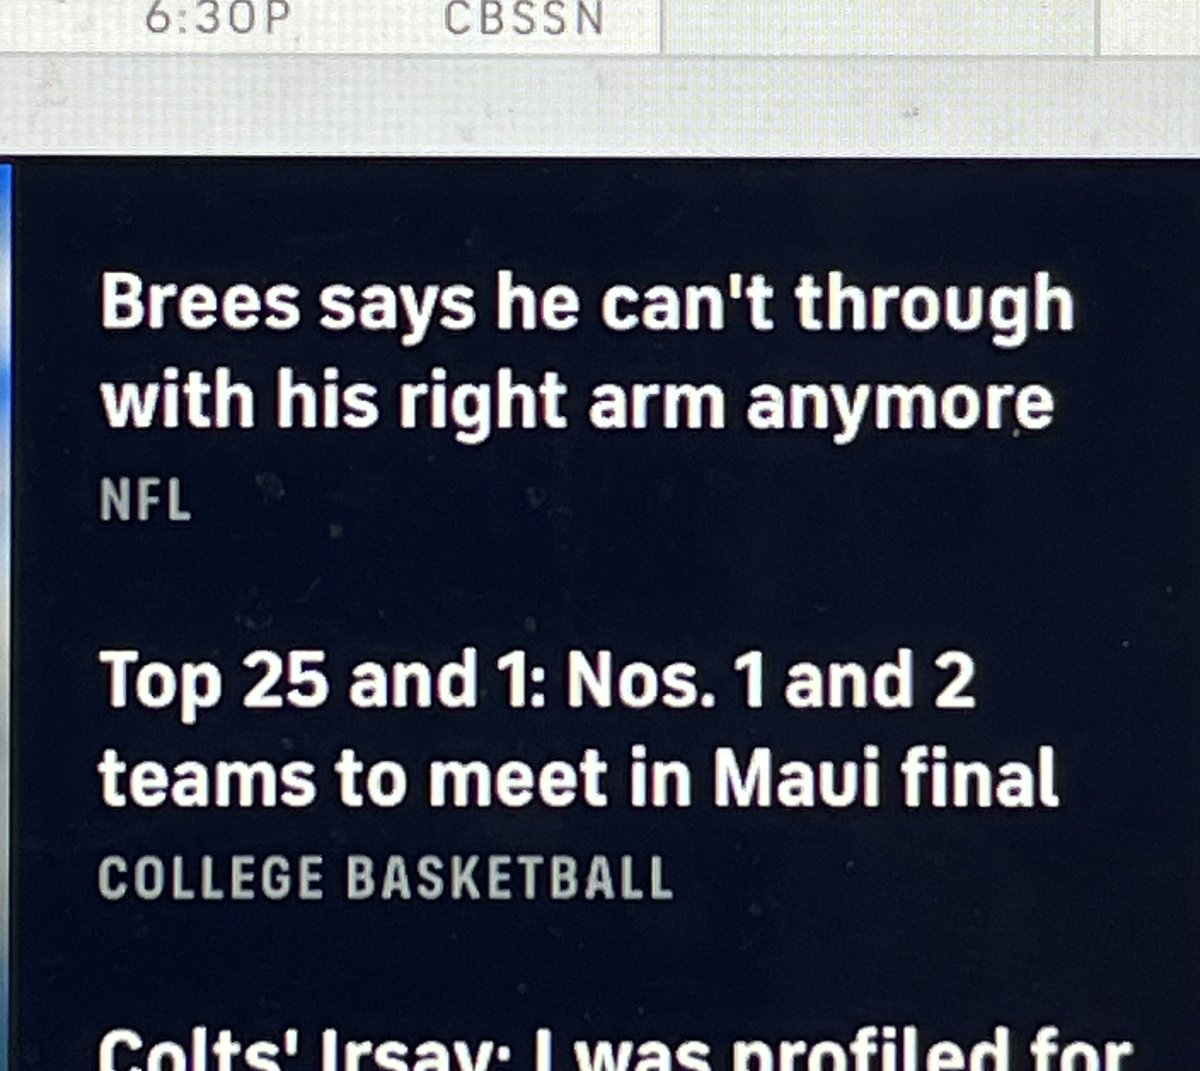 Another example that Journalism is dead…nice headline @cbssports … I think we all hope that Drew Brees can one day “through” again